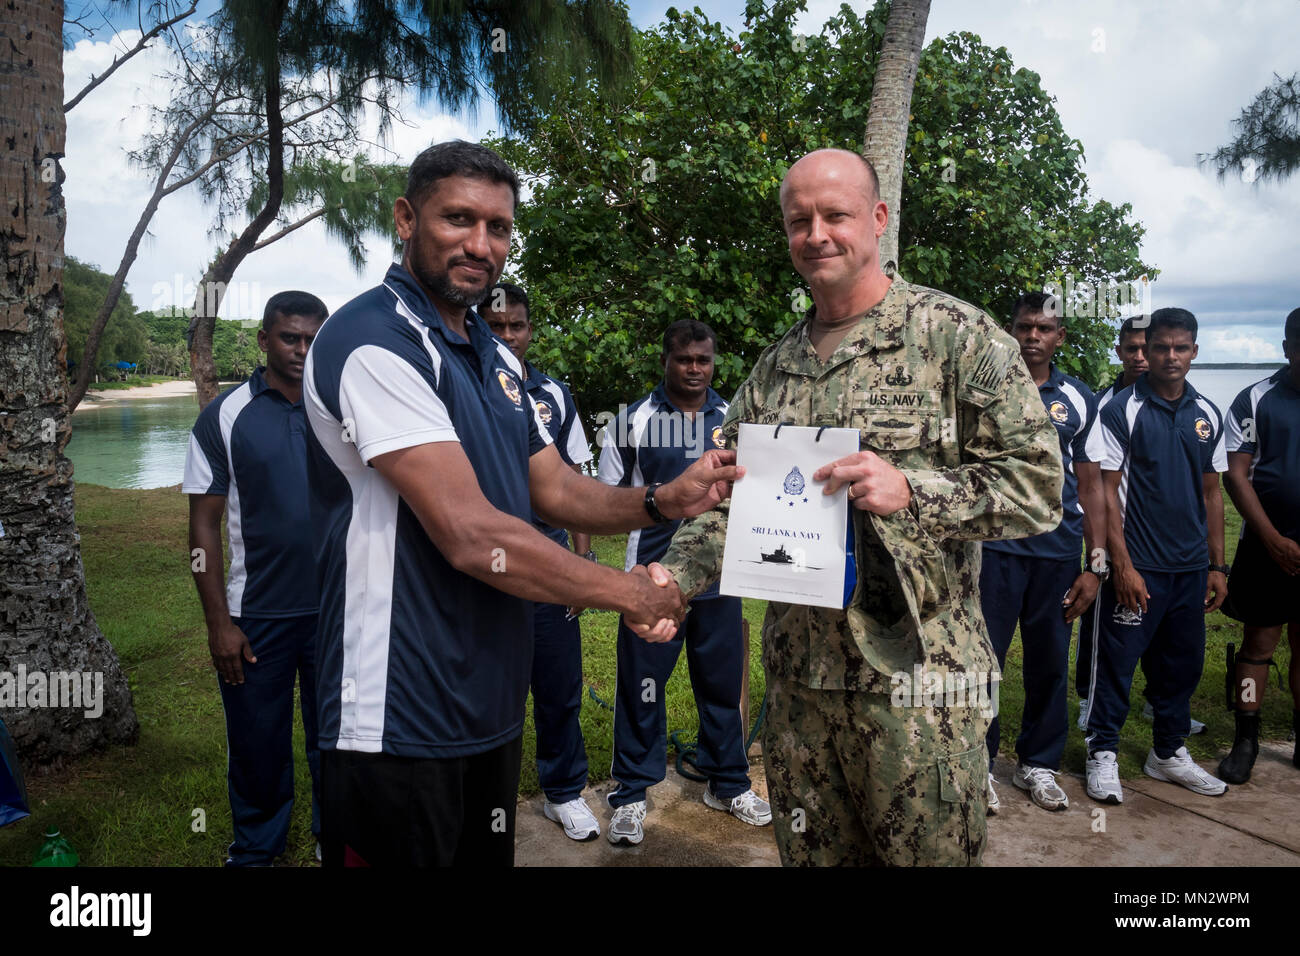 Sri Lanka Navy (SLN) Capt. HNS Perera and Cmdr. Andrew Cook, assigned to Commander, Task Force (CTF) 75, exchange gifts during a Diving Subject Matter Expert Exchange (SMEE) at Naval Base Guam, Aug. 16, 2017. CTF-75 conducts SMEEs to strengthen the relationship and understanding between SLN and USN Divers through surface-supplied and SCUBA diving operations. (U.S. Navy Combat Camera photo by Mass Communication Specialist 1st Class Arthurgwain L. Marquez) Stock Photo